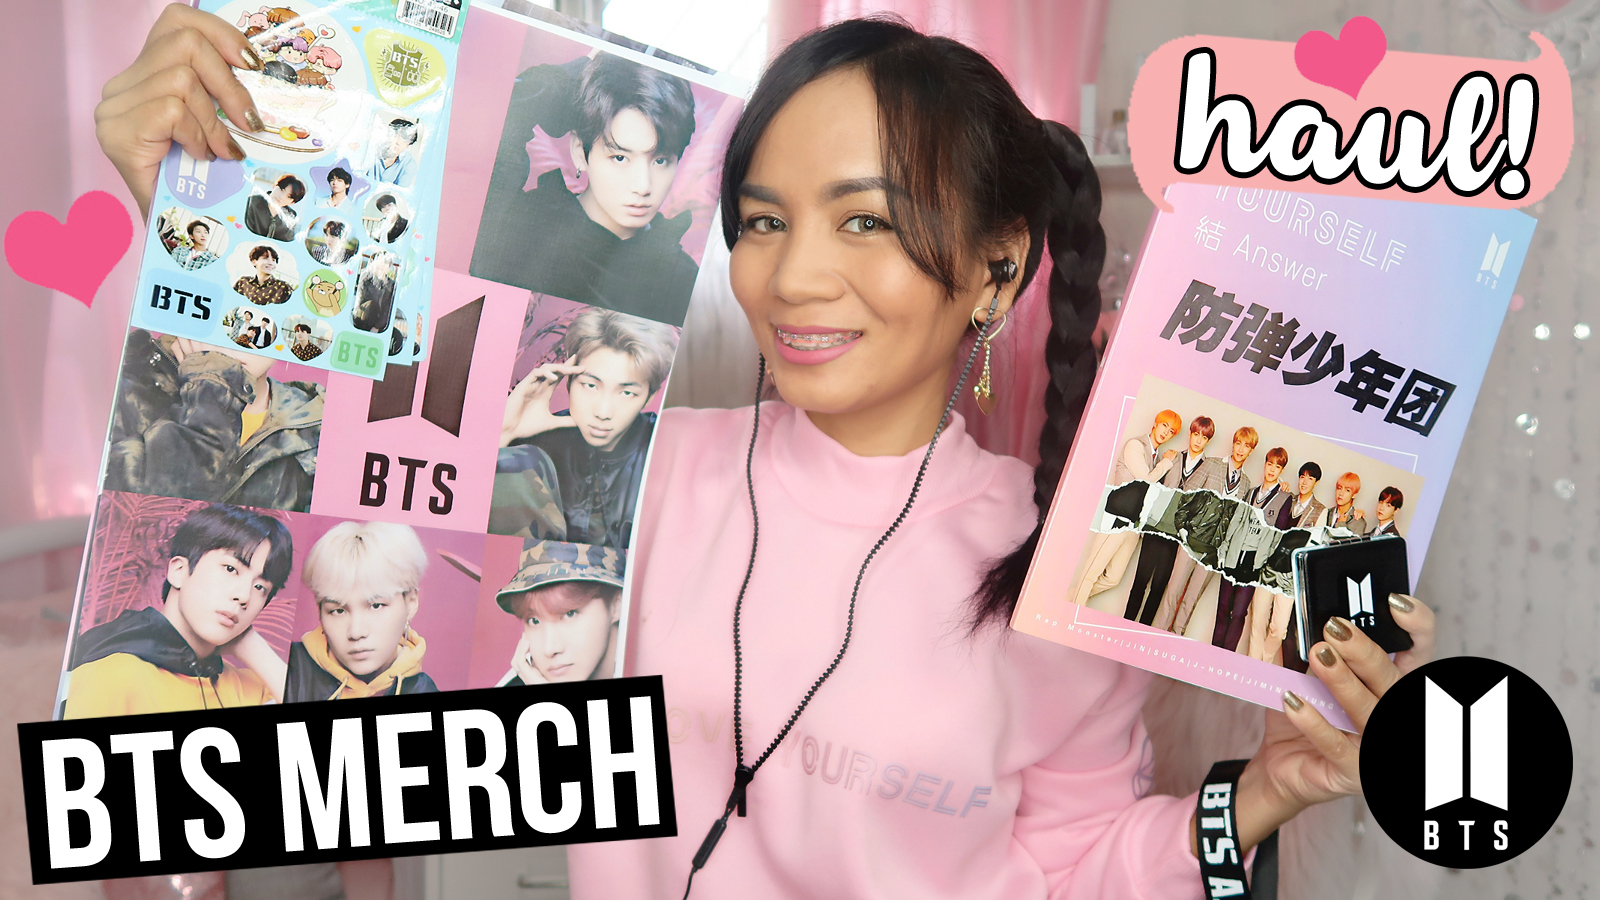 Can you Spot The Cheapest Kpop Shop Pro?